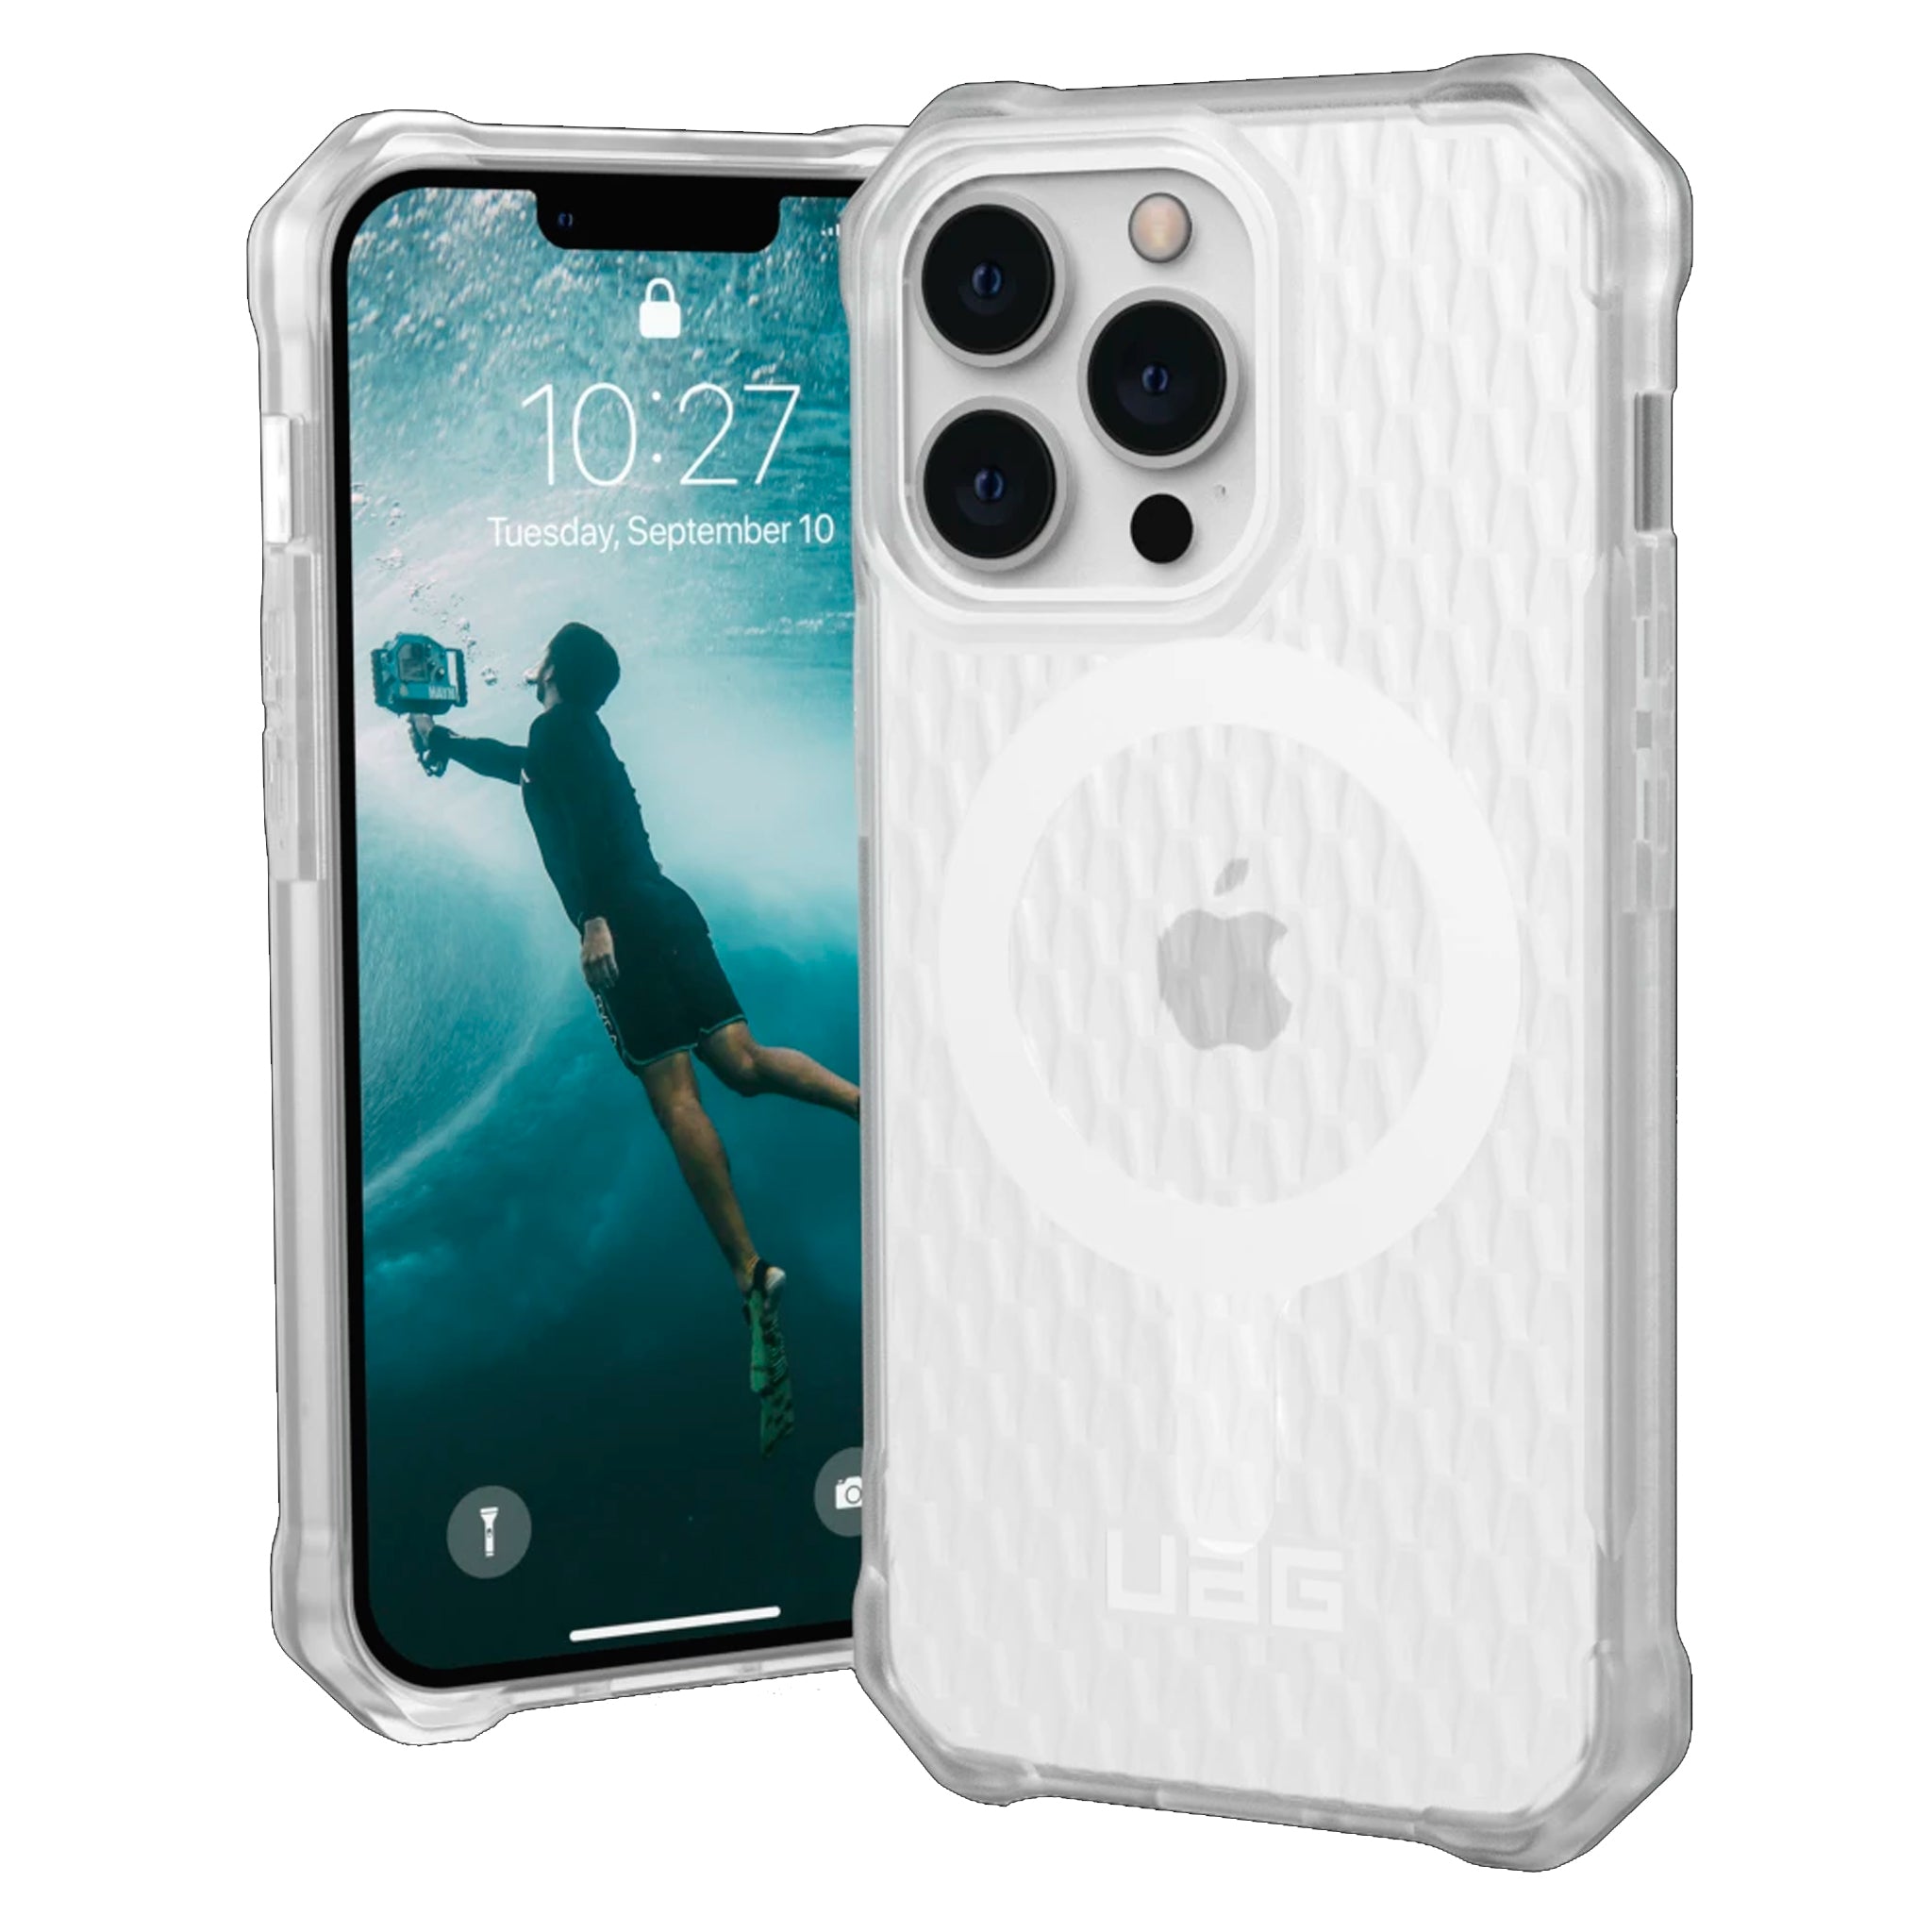 Urban Armor Gear (uag) - Essential Armor Magsafe Case For Apple Iphone 13 Pro - Frosted Ice